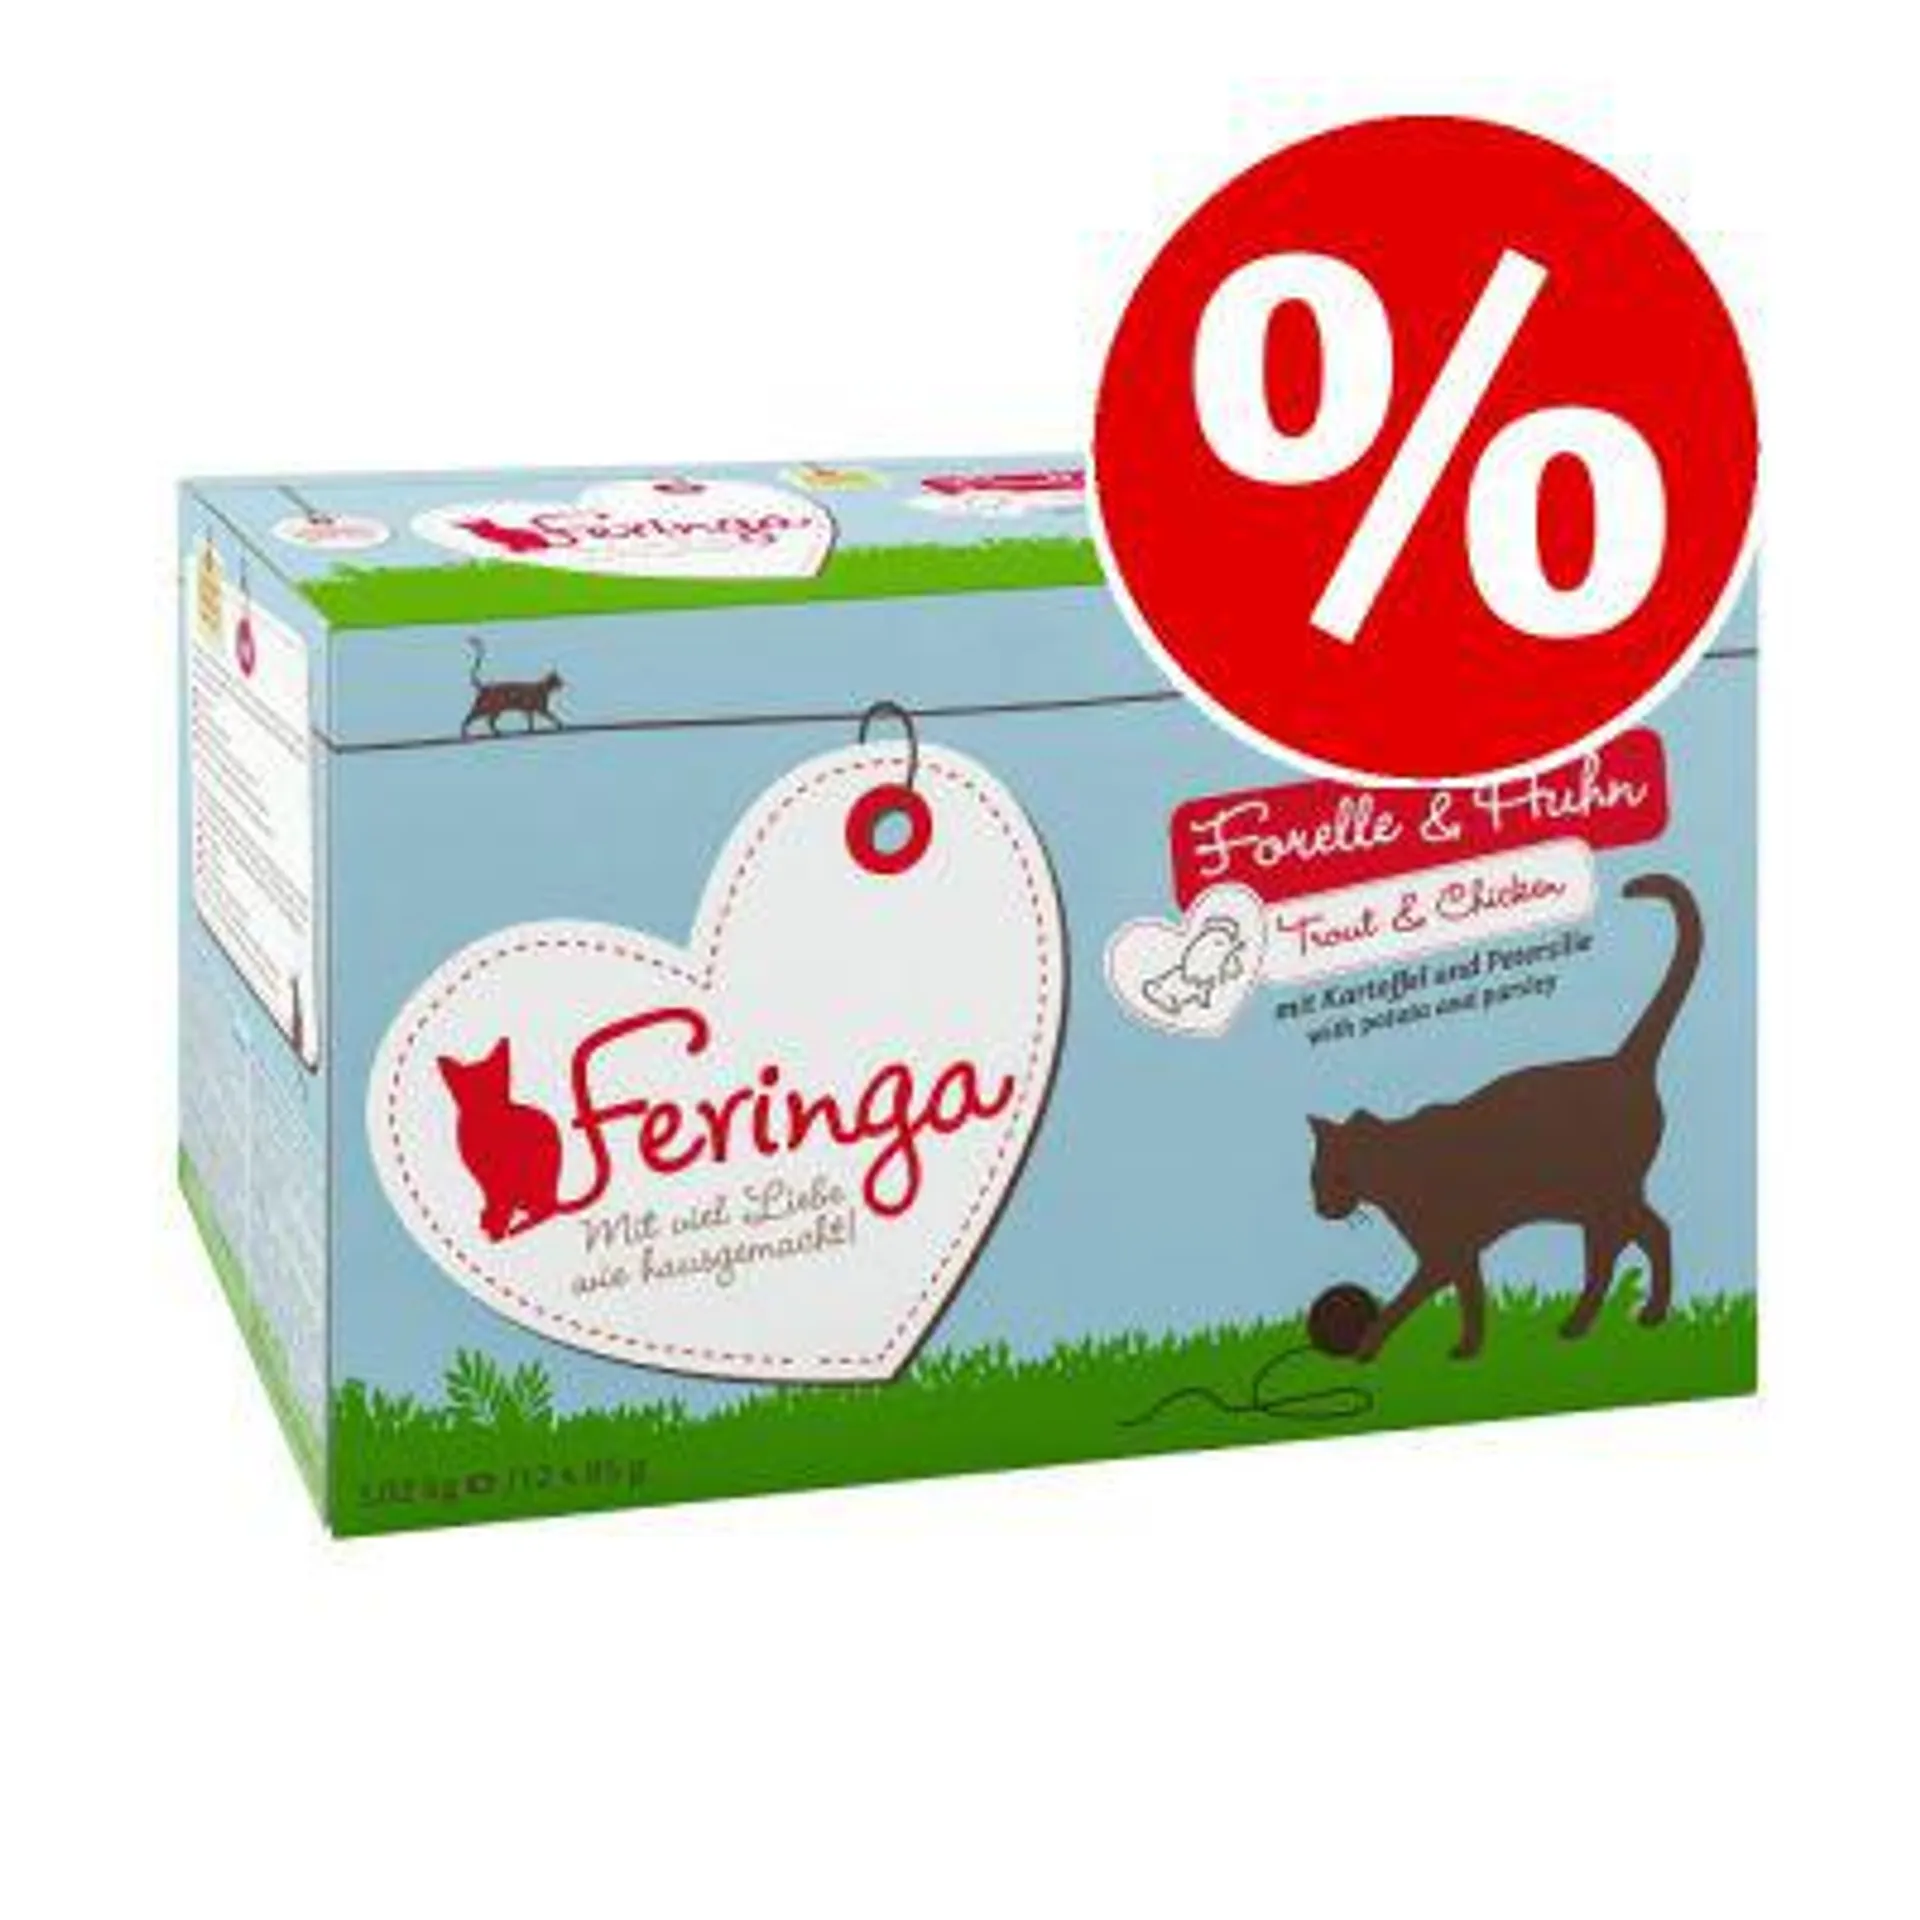 12 x 85g Feringa Classic Meat Menu Pouches Wet Cat Food - Special Price!*